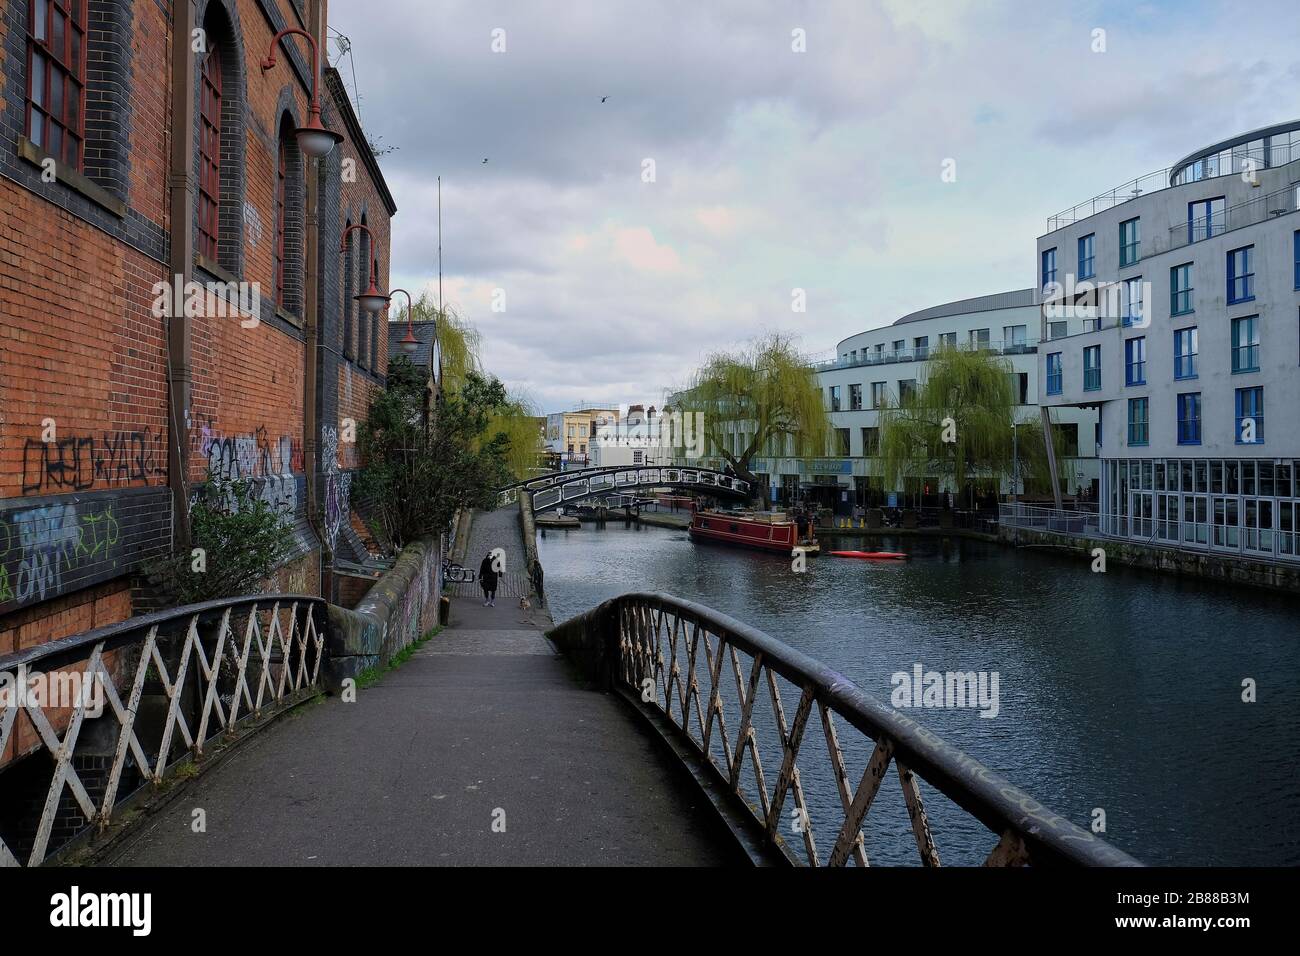 Camden Lock, London, England - March 20, 2020: Coronavirus grips Camden on Friday afternoon shoppers and tourist stay away in fear of catching the vir Stock Photo